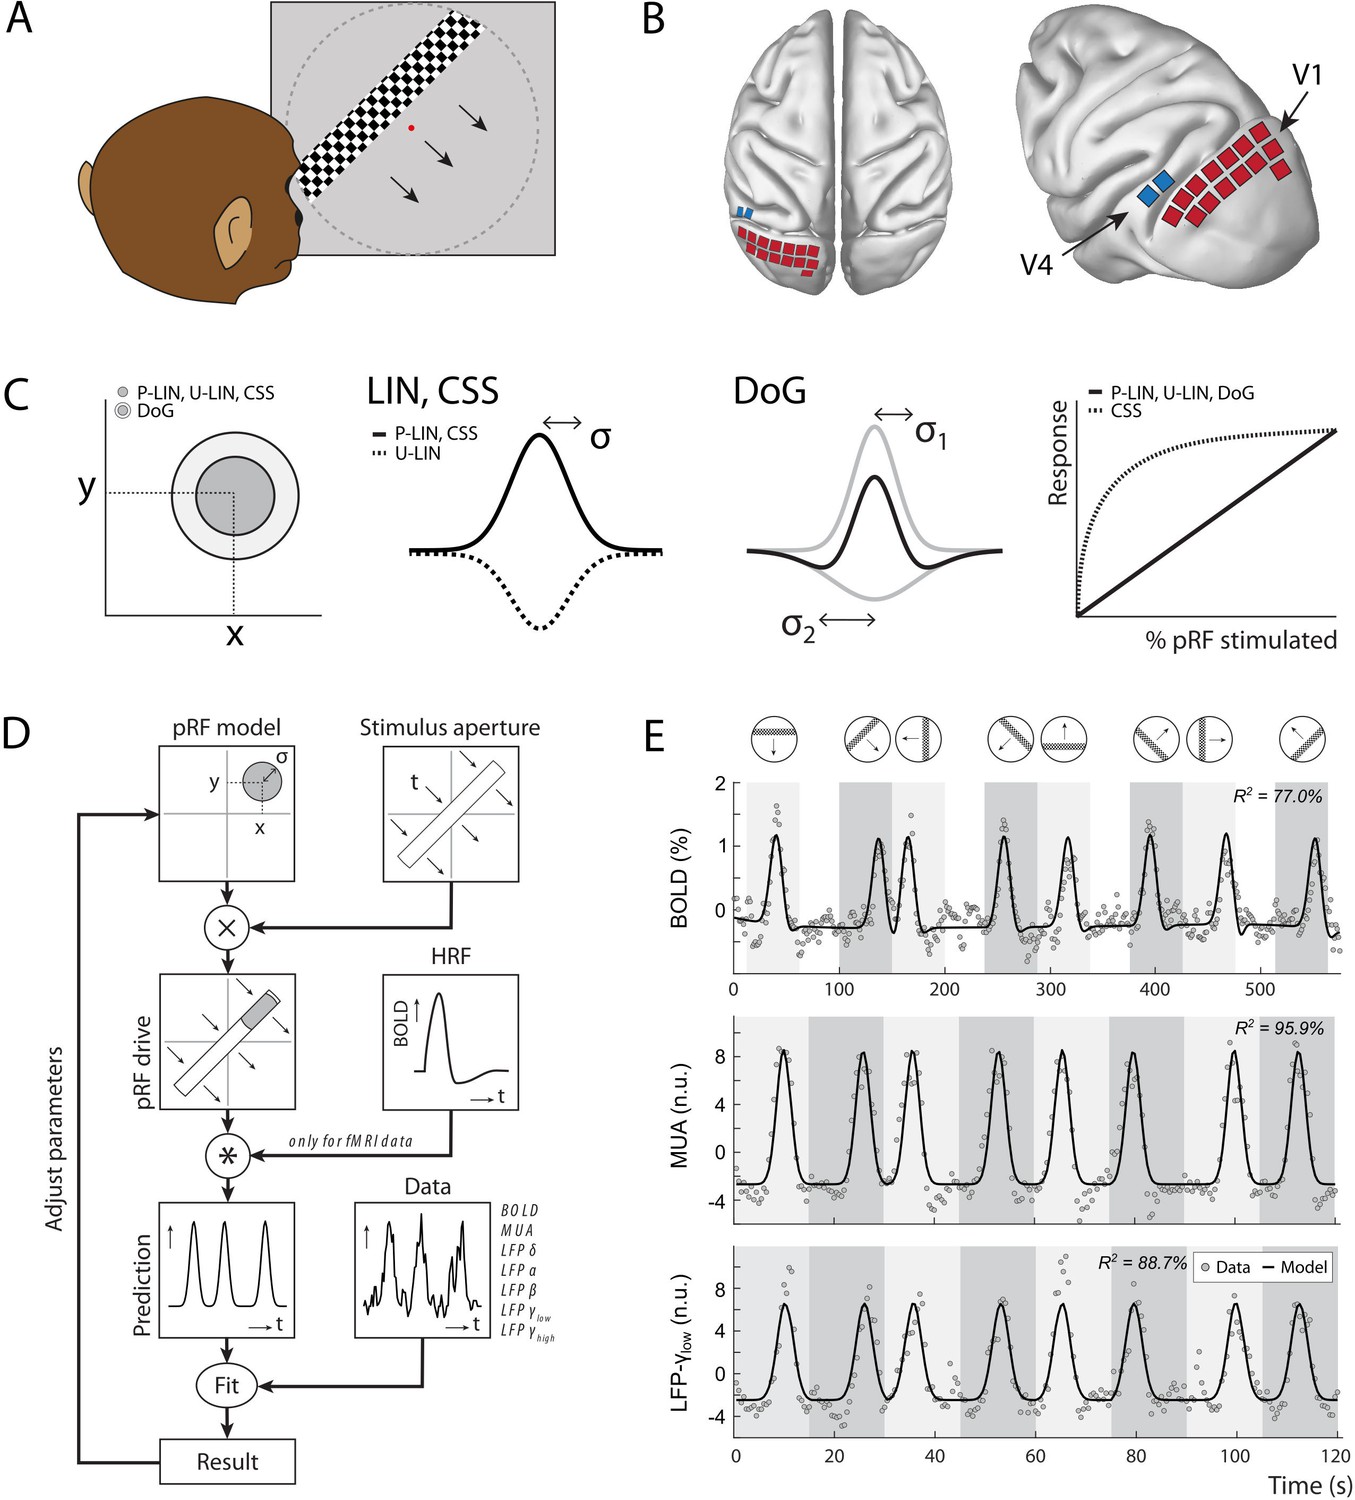 Population Receptive Fields In Nonhuman Primates From Whole Brain Fmri And Large Scale Neurophysiology In Visual Cortex Elife